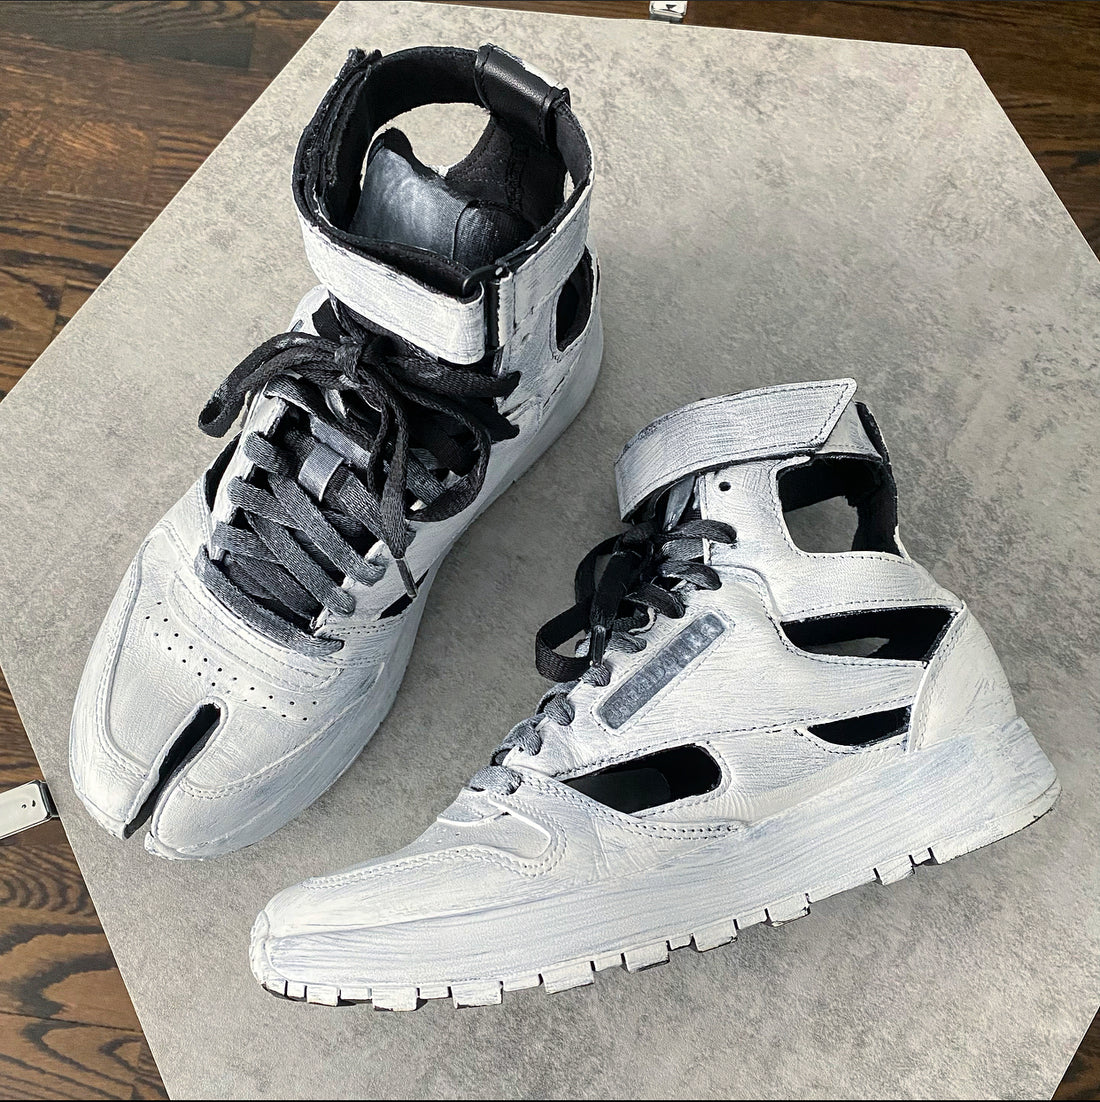 Margiela x Reebok Painted Cut out High Top Sneakers - USA 7.5